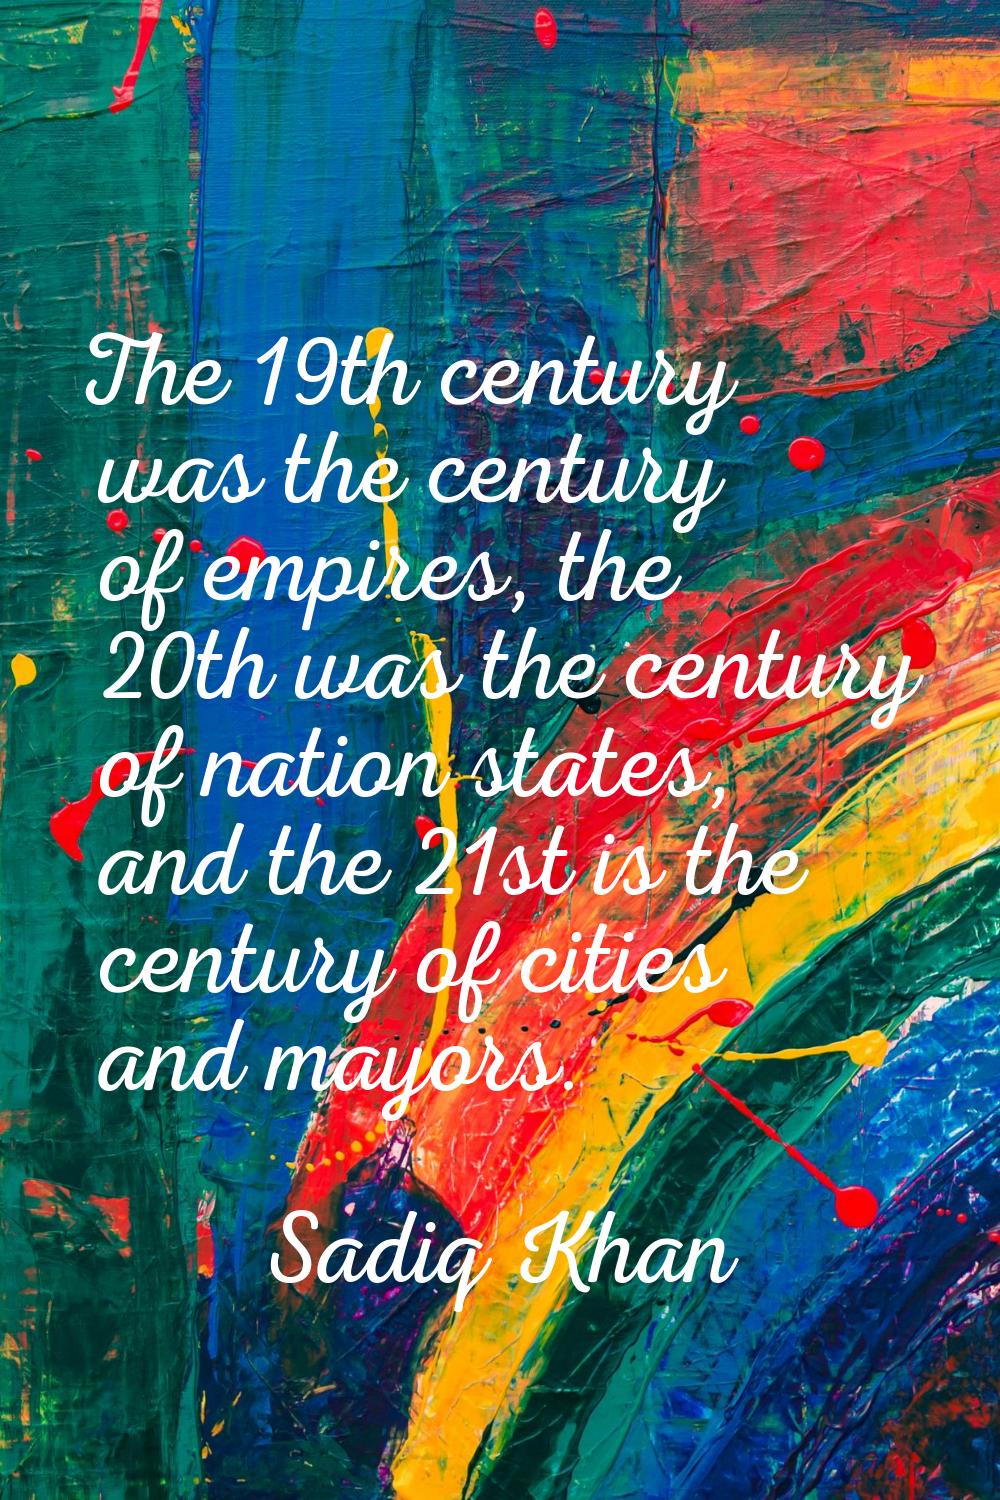 The 19th century was the century of empires, the 20th was the century of nation states, and the 21s